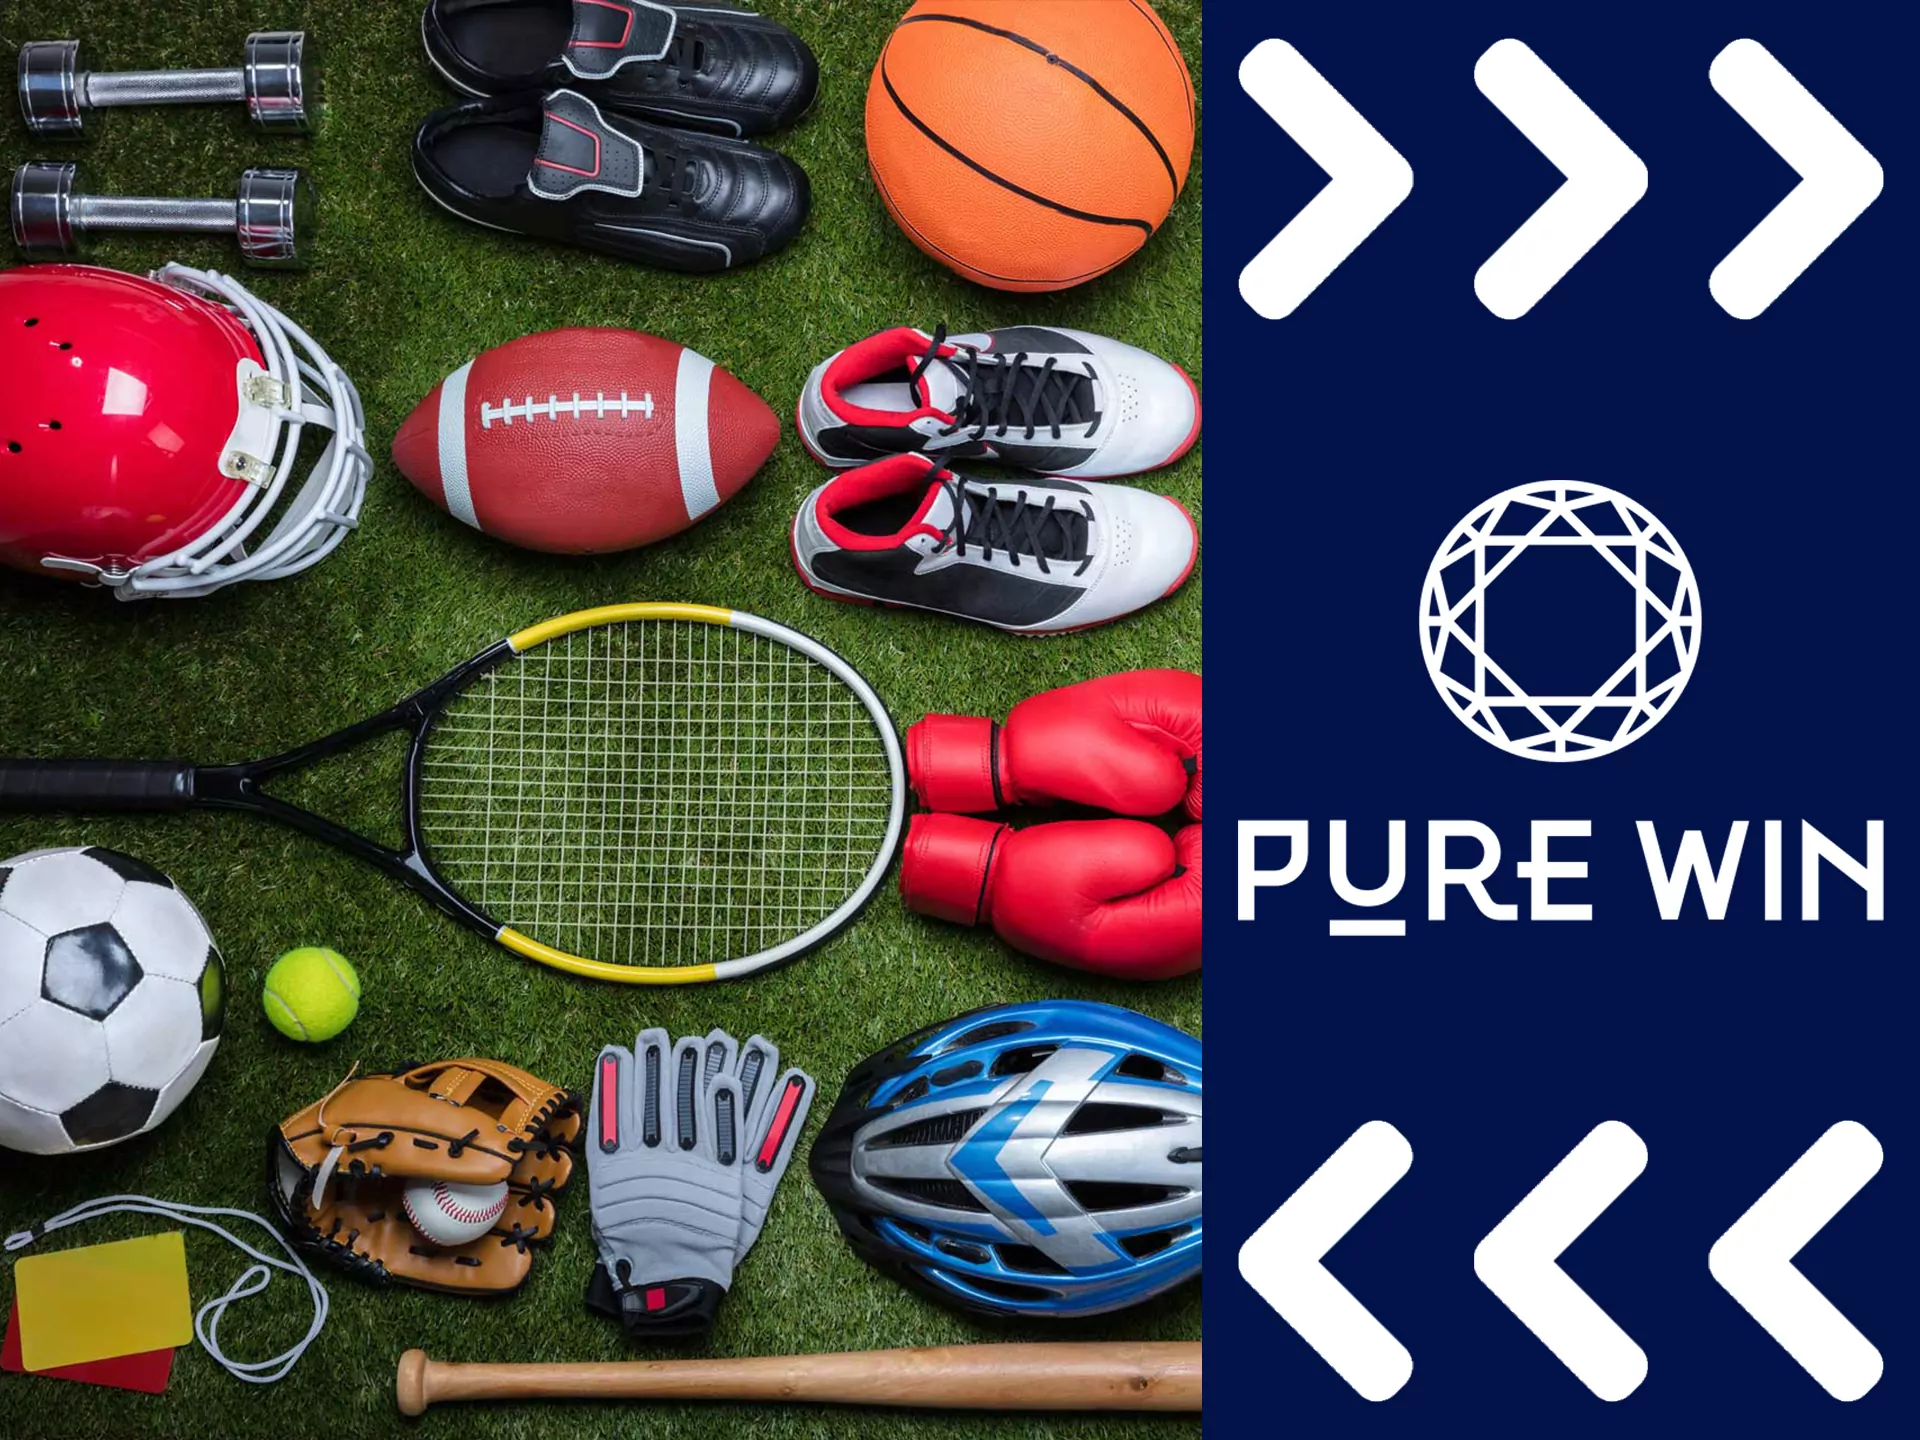 Bet on different sports at Pure Win.